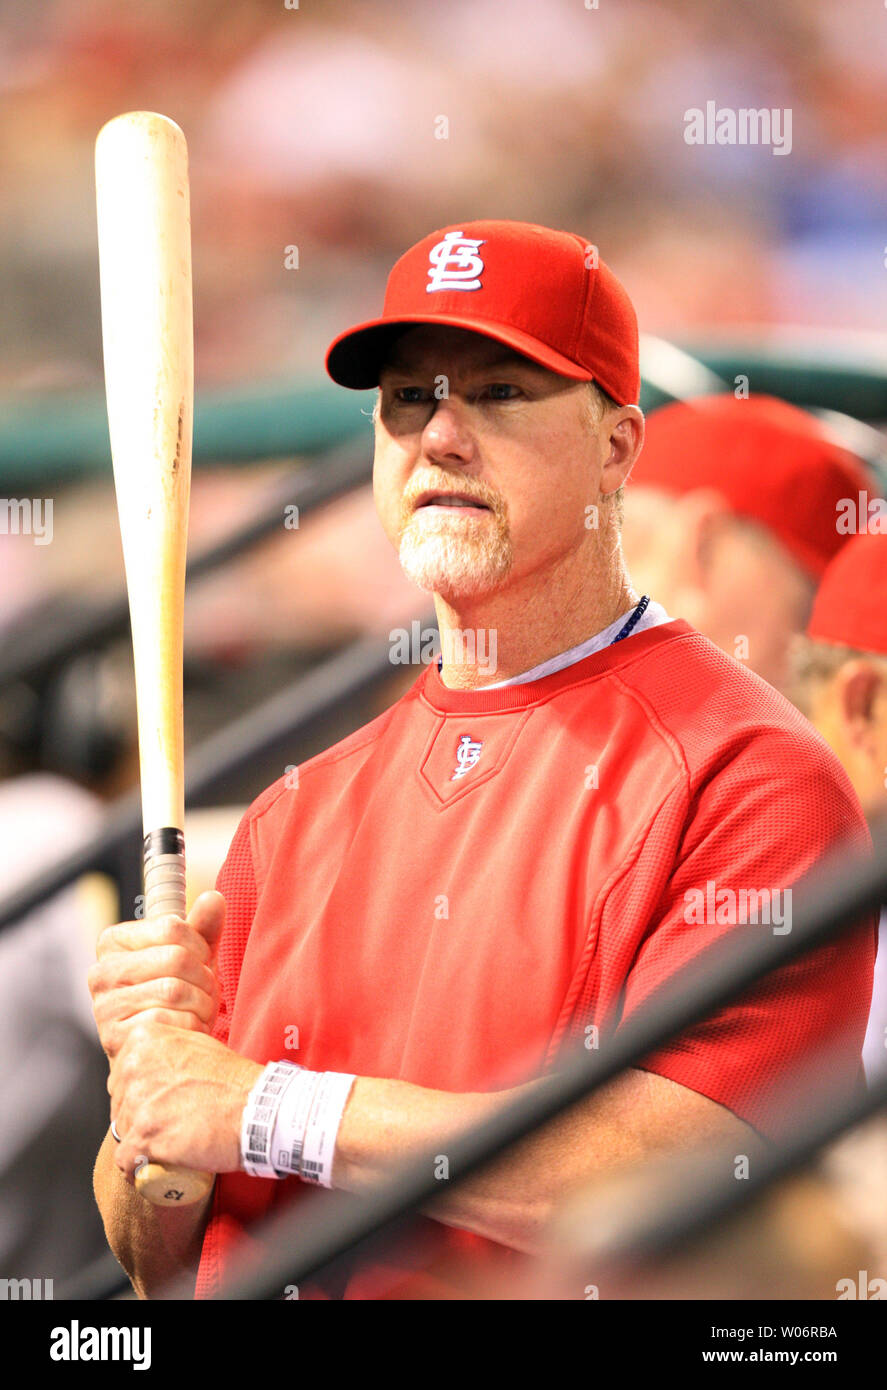 St. Louis Cardinals hitting coach Mark McGwire holds a bat in the dugout  during a game against the Milwaukee Brewers at Busch Stadium in St. Louis  on June 4, 2010. McGwire has